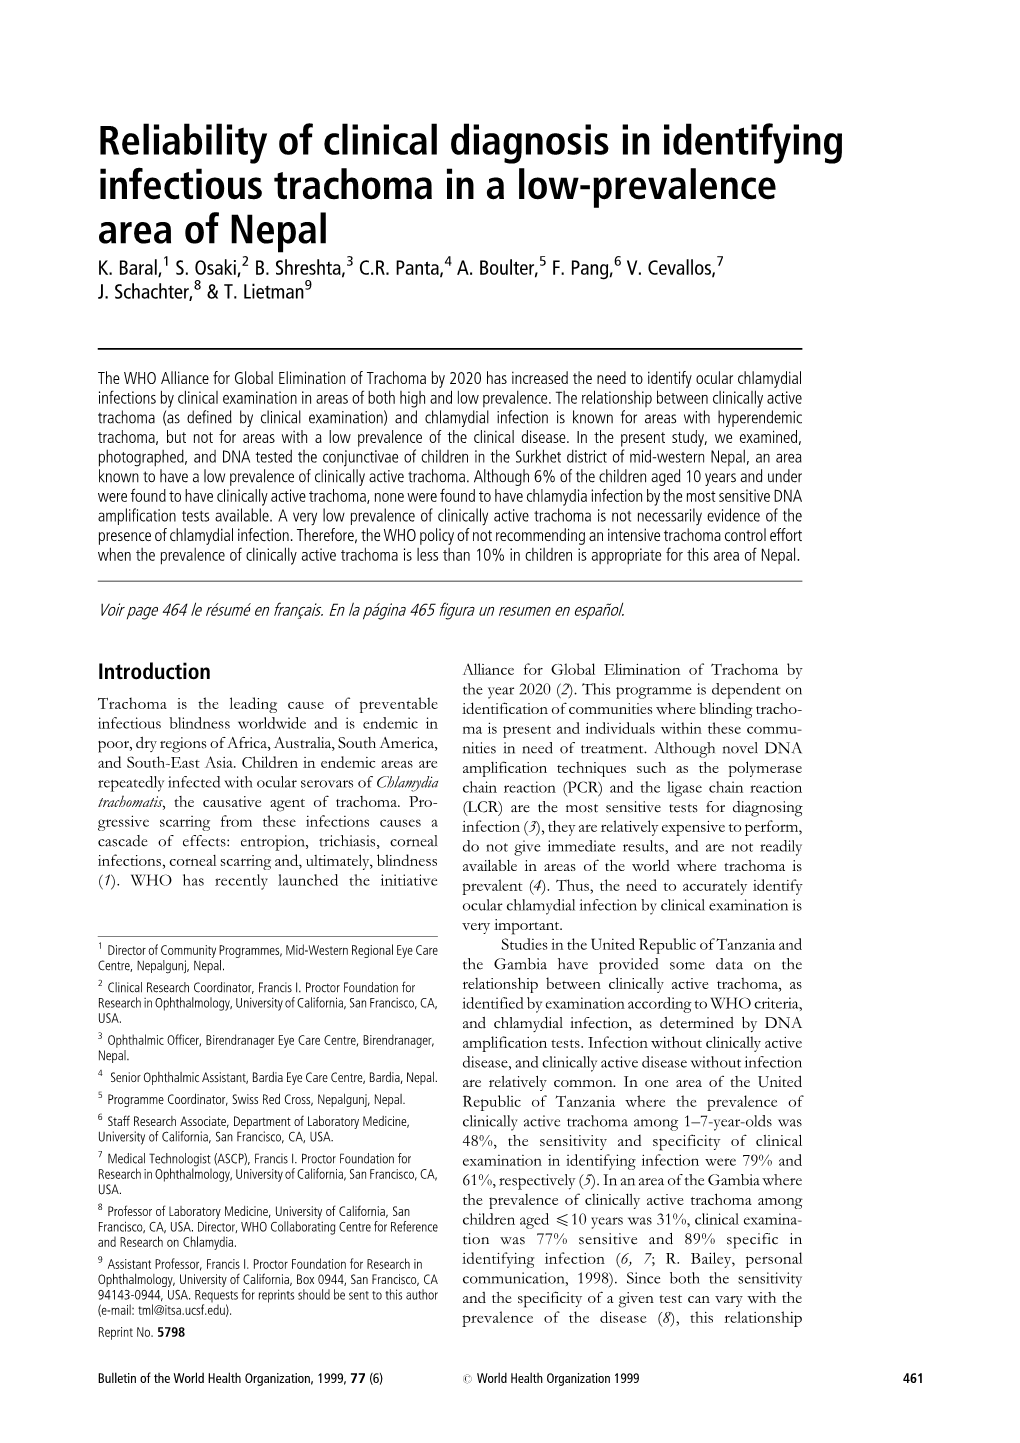 Reliability of Clinical Diagnosis in Identifying Infectious Trachoma in a Low-Prevalence Area of Nepal K